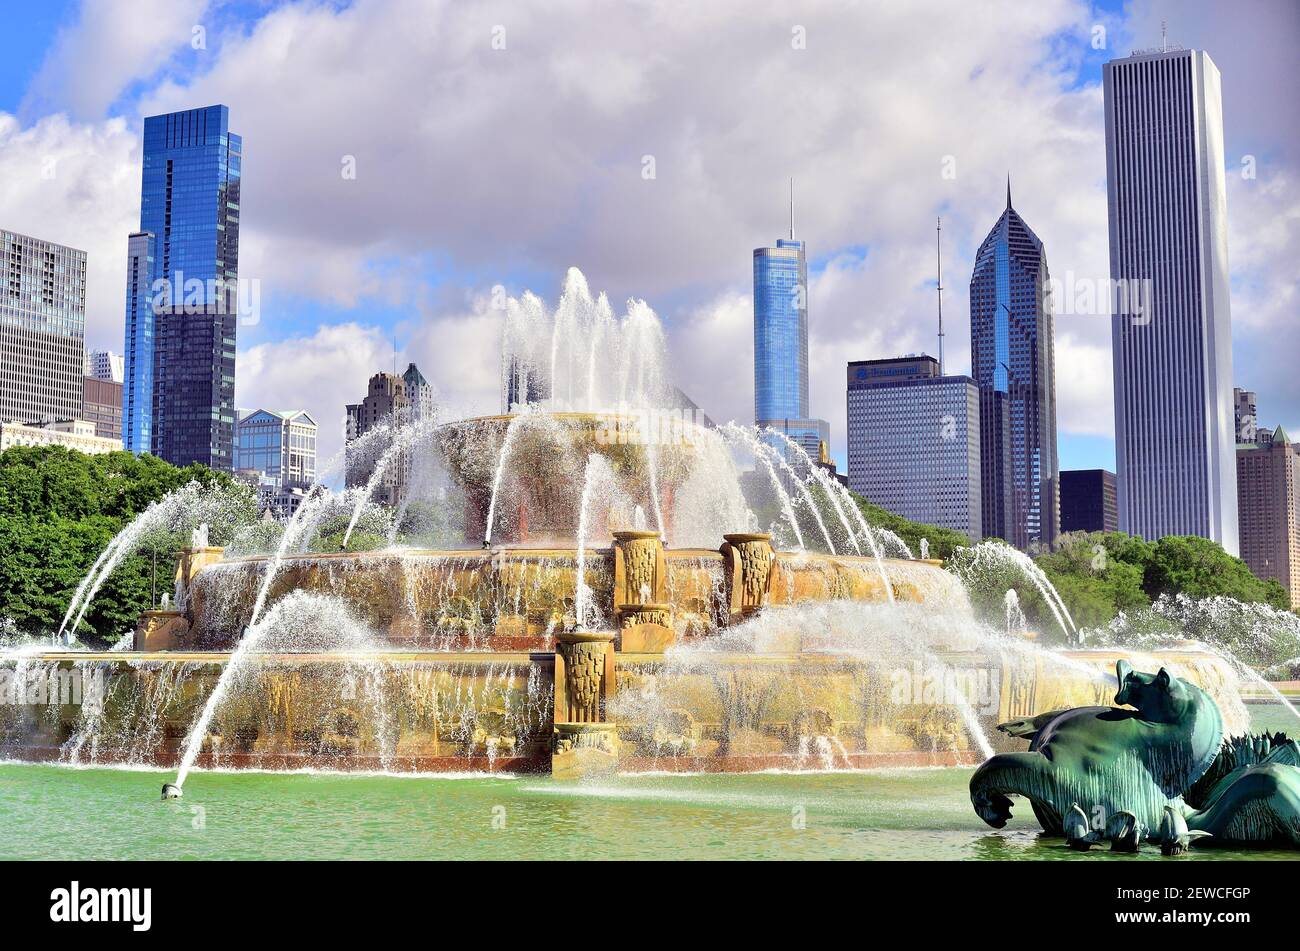 Chicago, Illinois, USA. Buckingham Fountain provides a flowing foreground to a portion of the city skyline that rises dynamically above it. Stock Photo